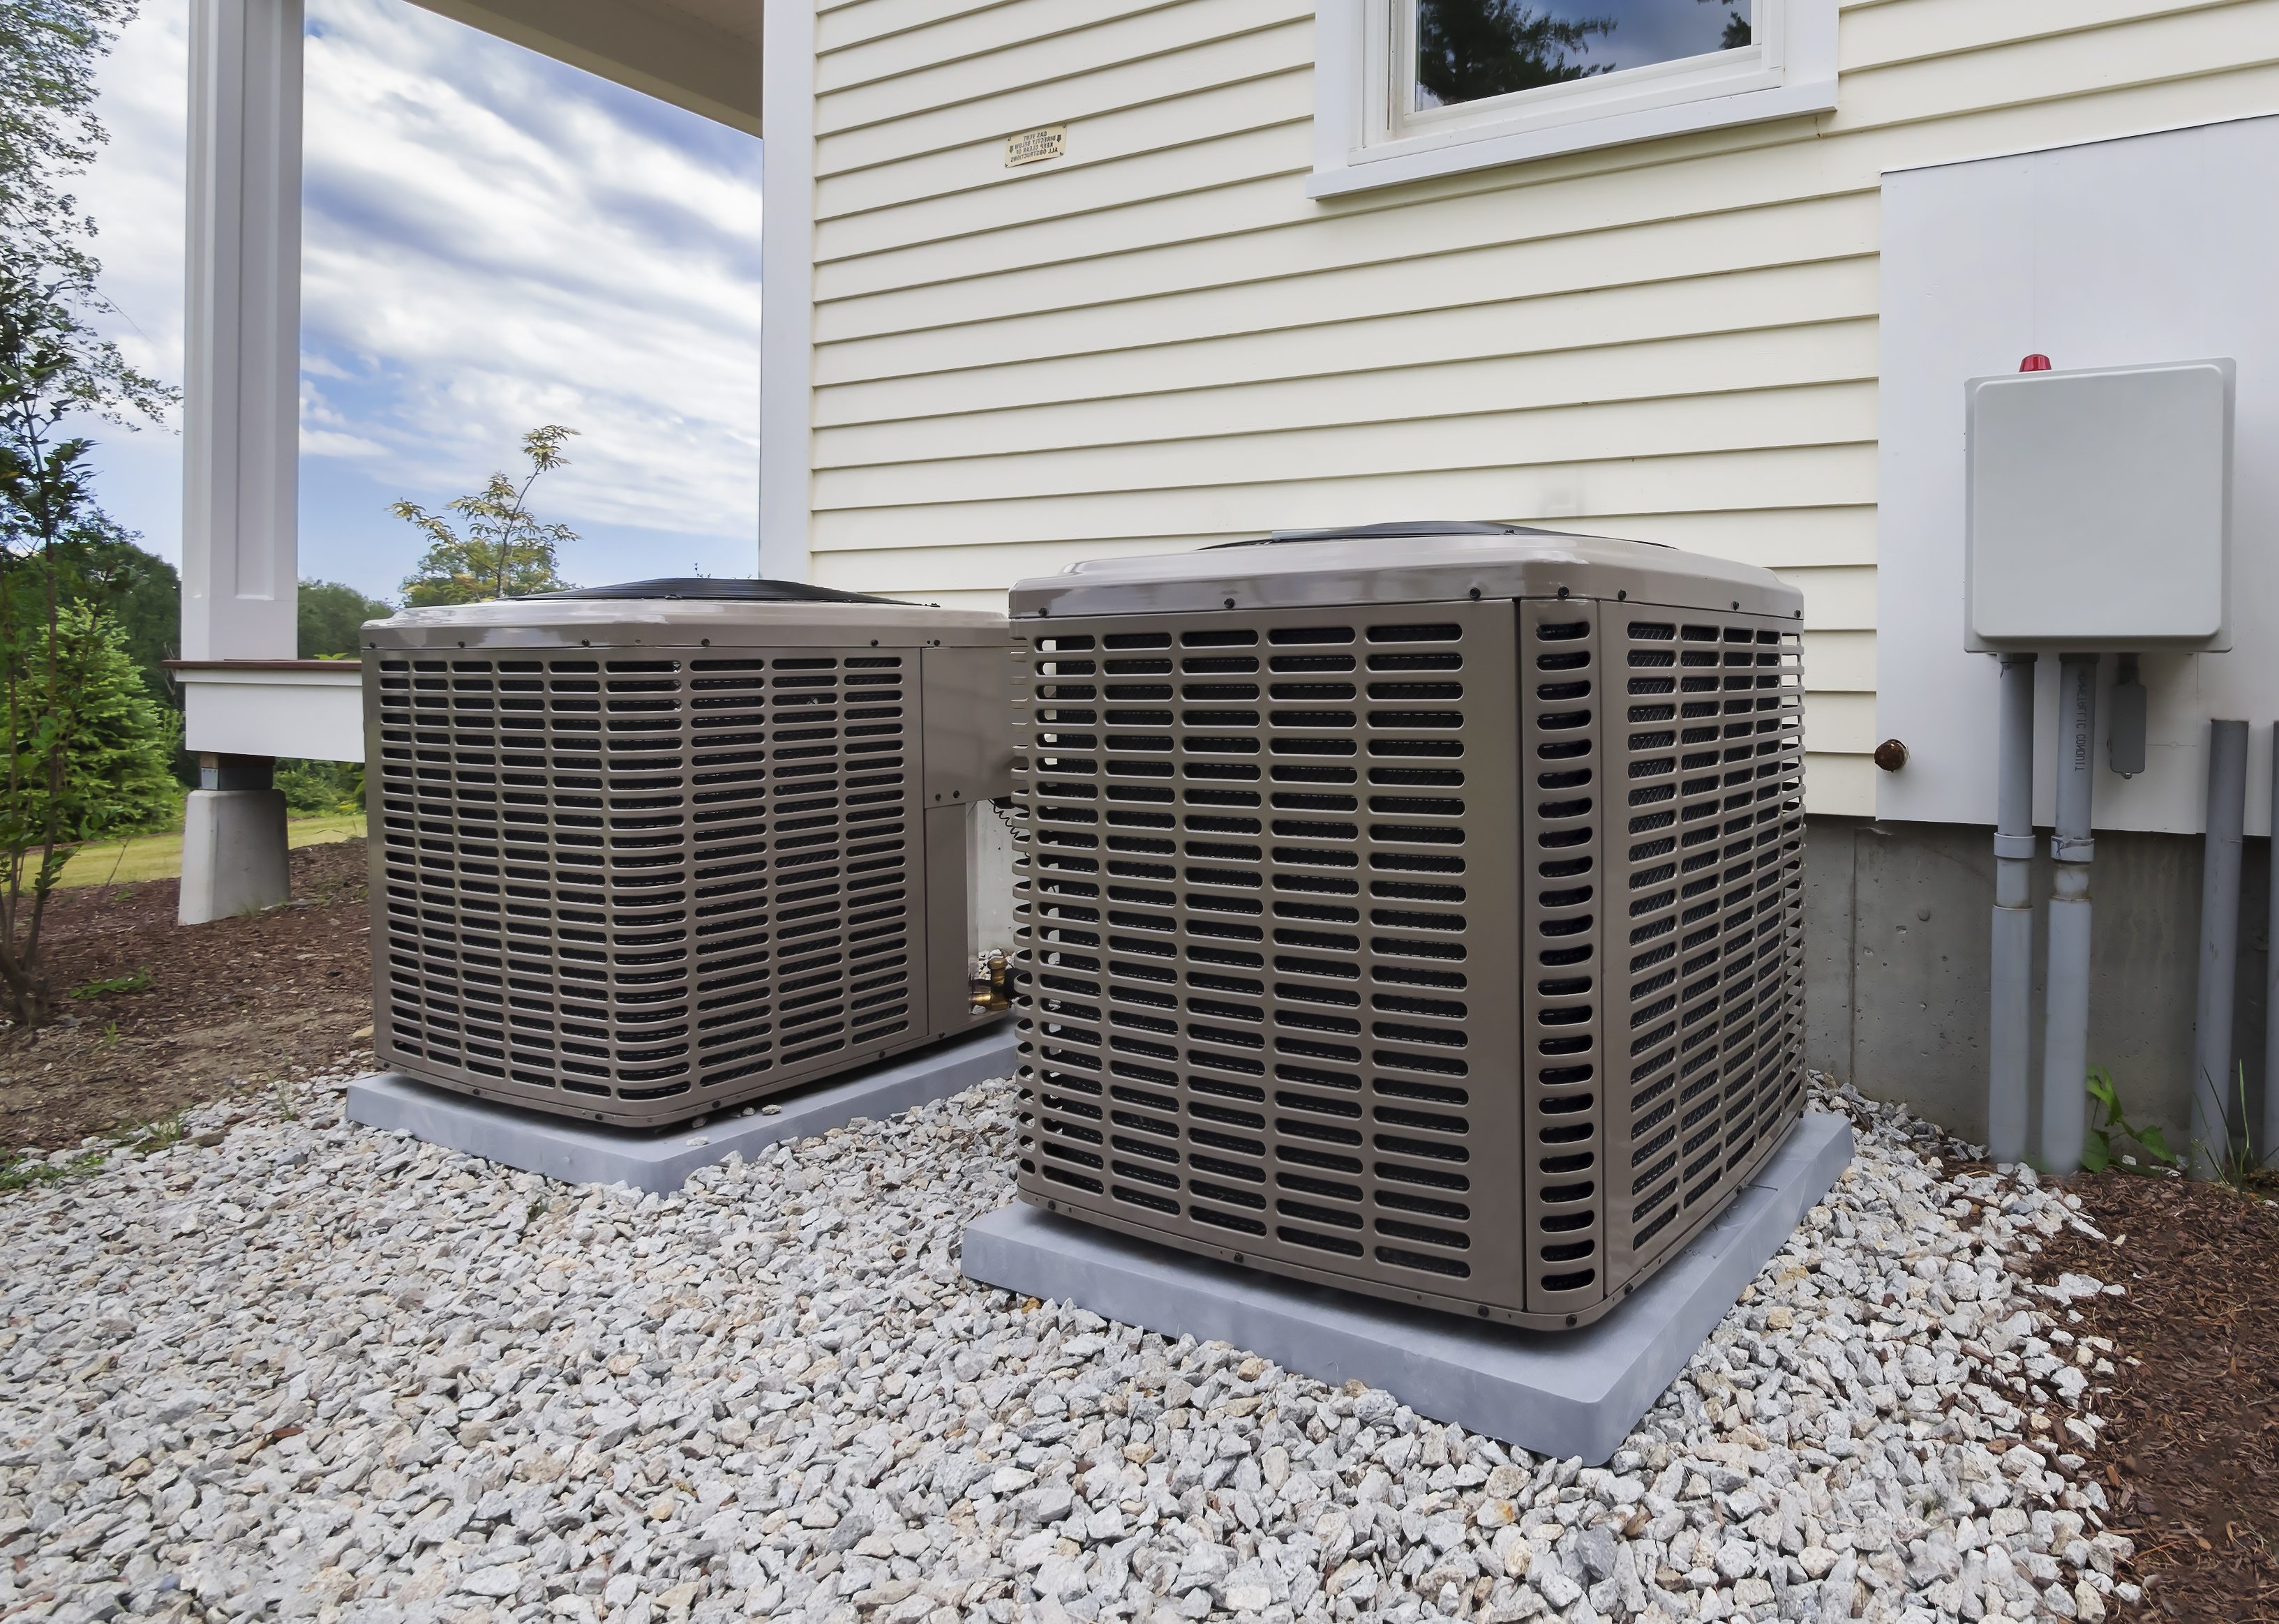 Upgrading the Pad: Save Big with Your New Air Conditioner